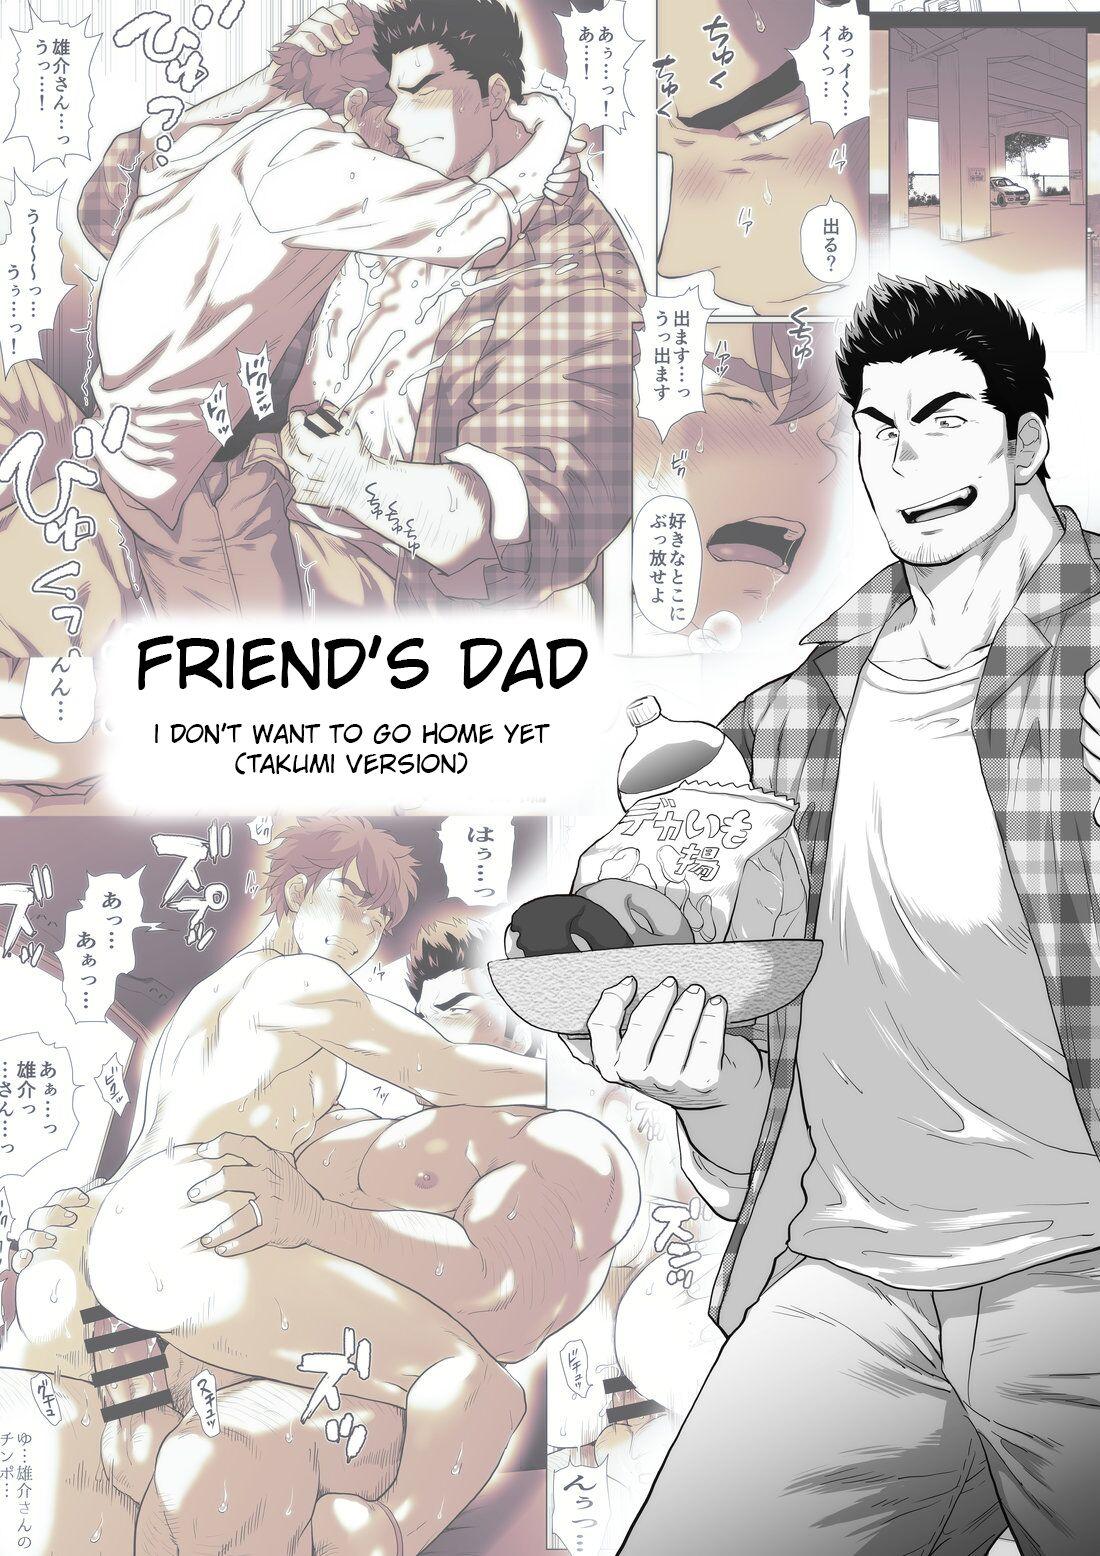 Friend’s dad Chapter 11 0